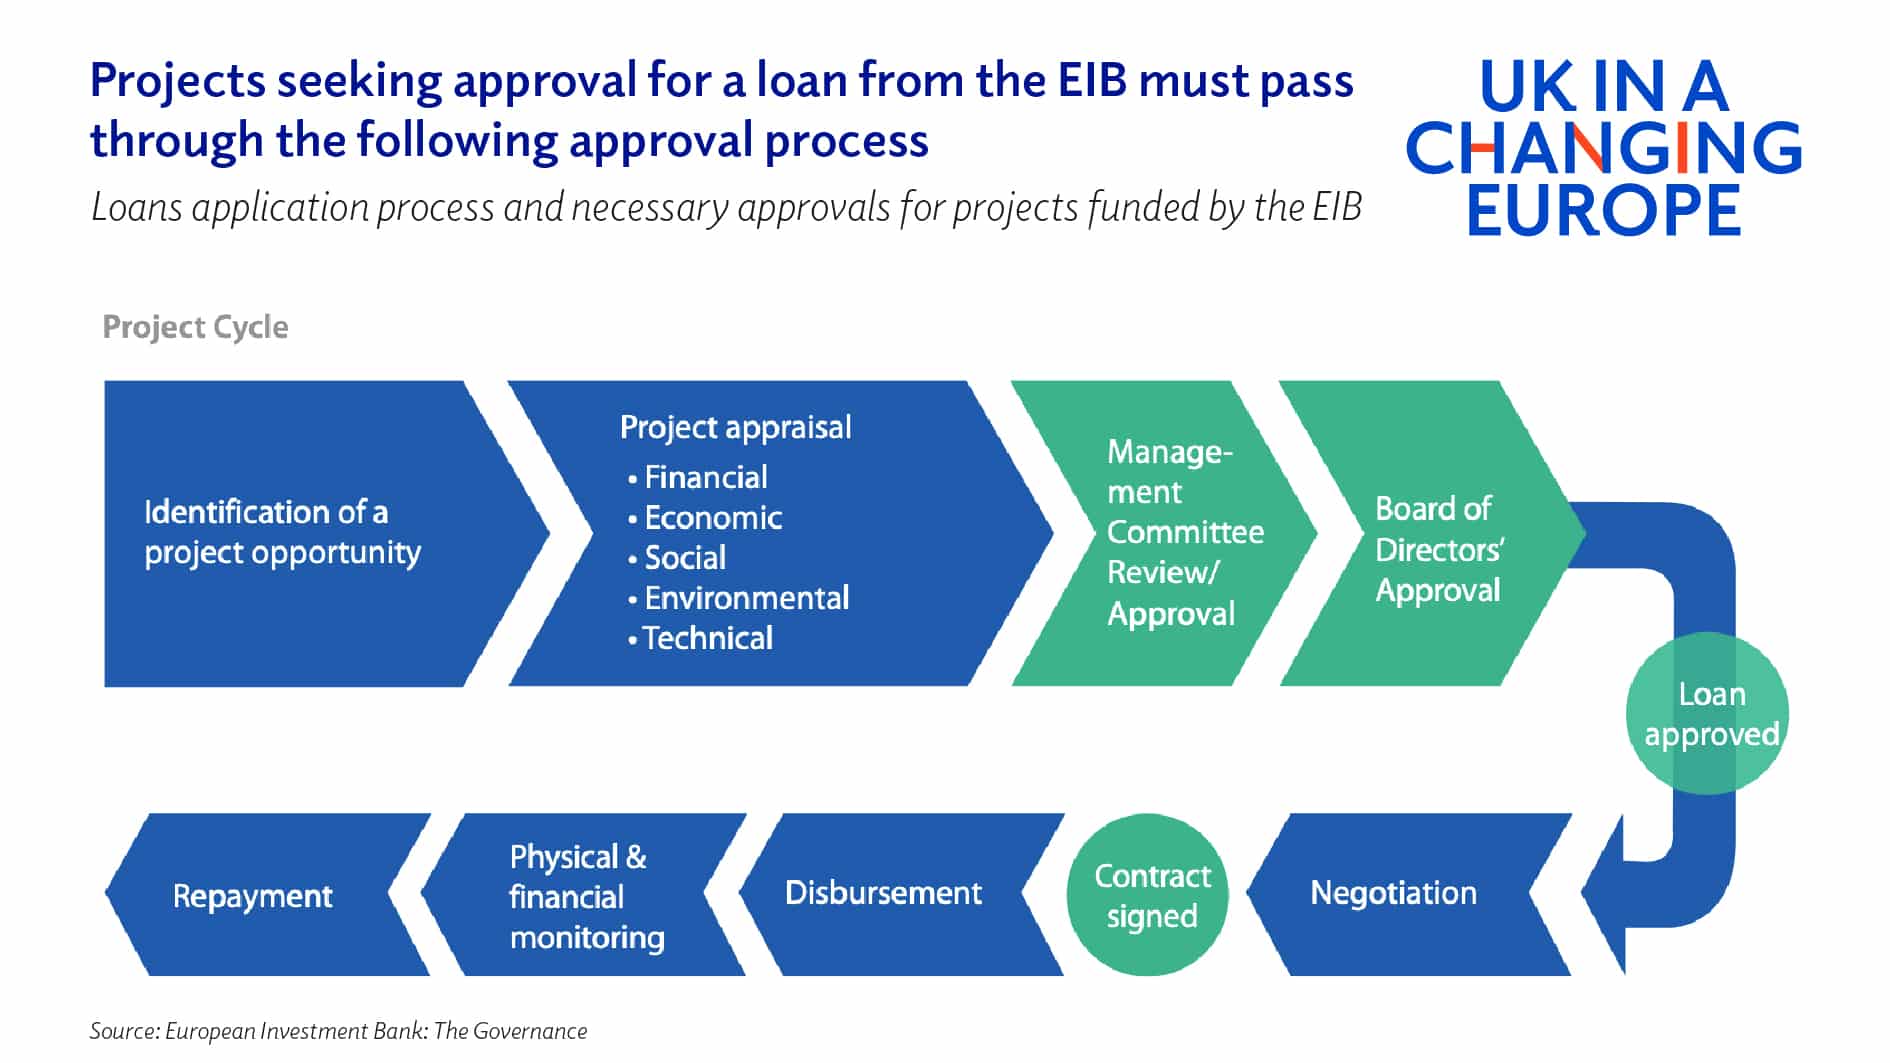 Chart showing the process for approval of a loan from the EIB